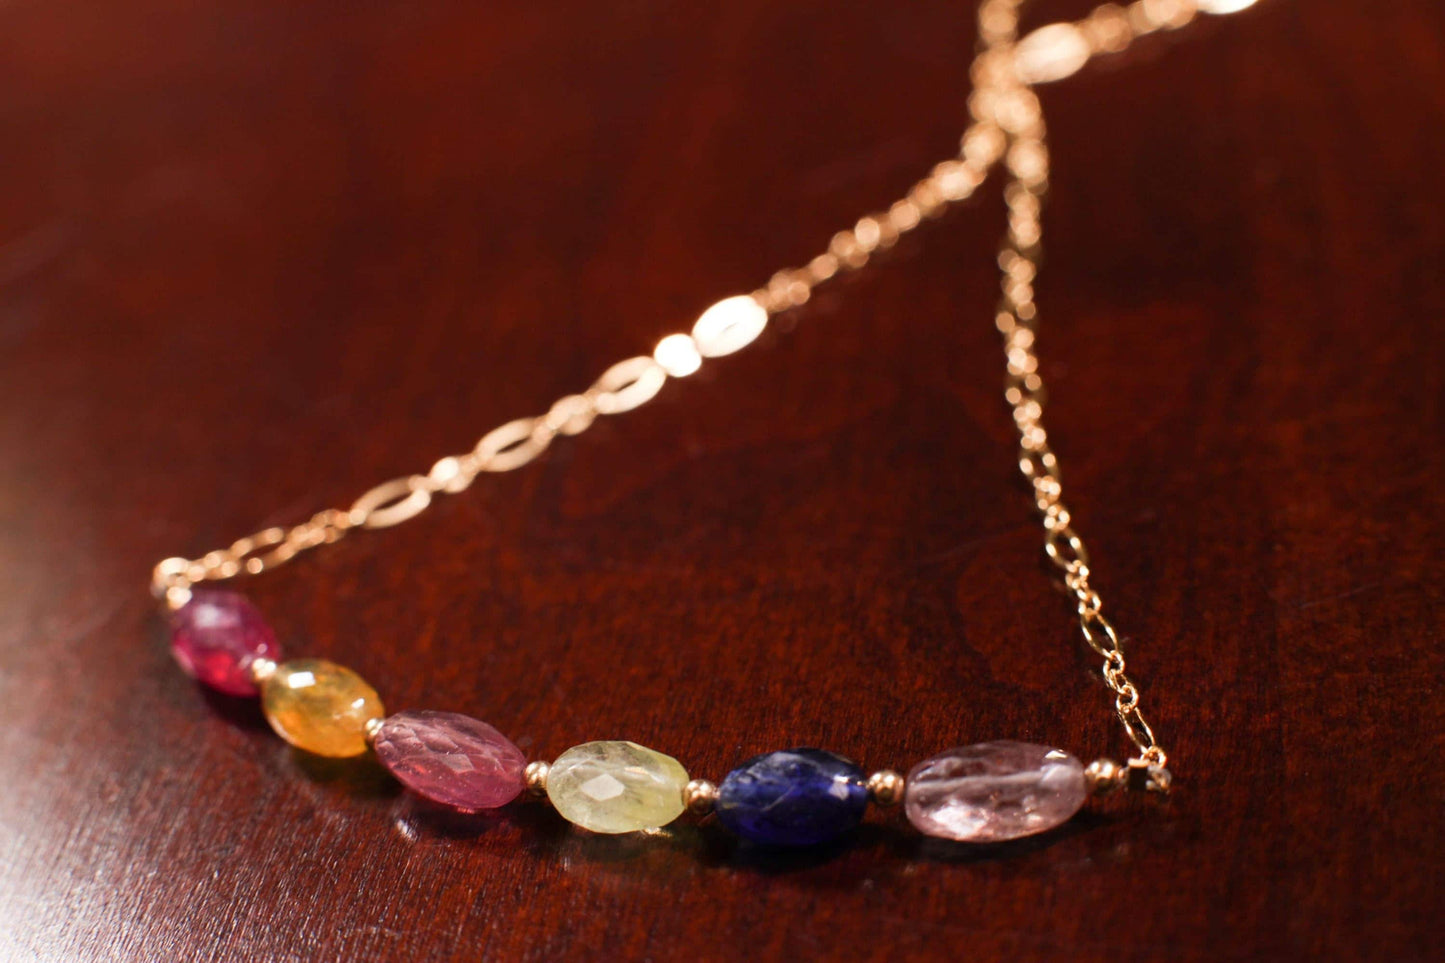 Natural Multi Sapphire Faceted Oval 5x8-9mm Gemstone Bar Necklace with 14K Gold Filled Spacers, Clasps and Chain, Elegant Gift for her